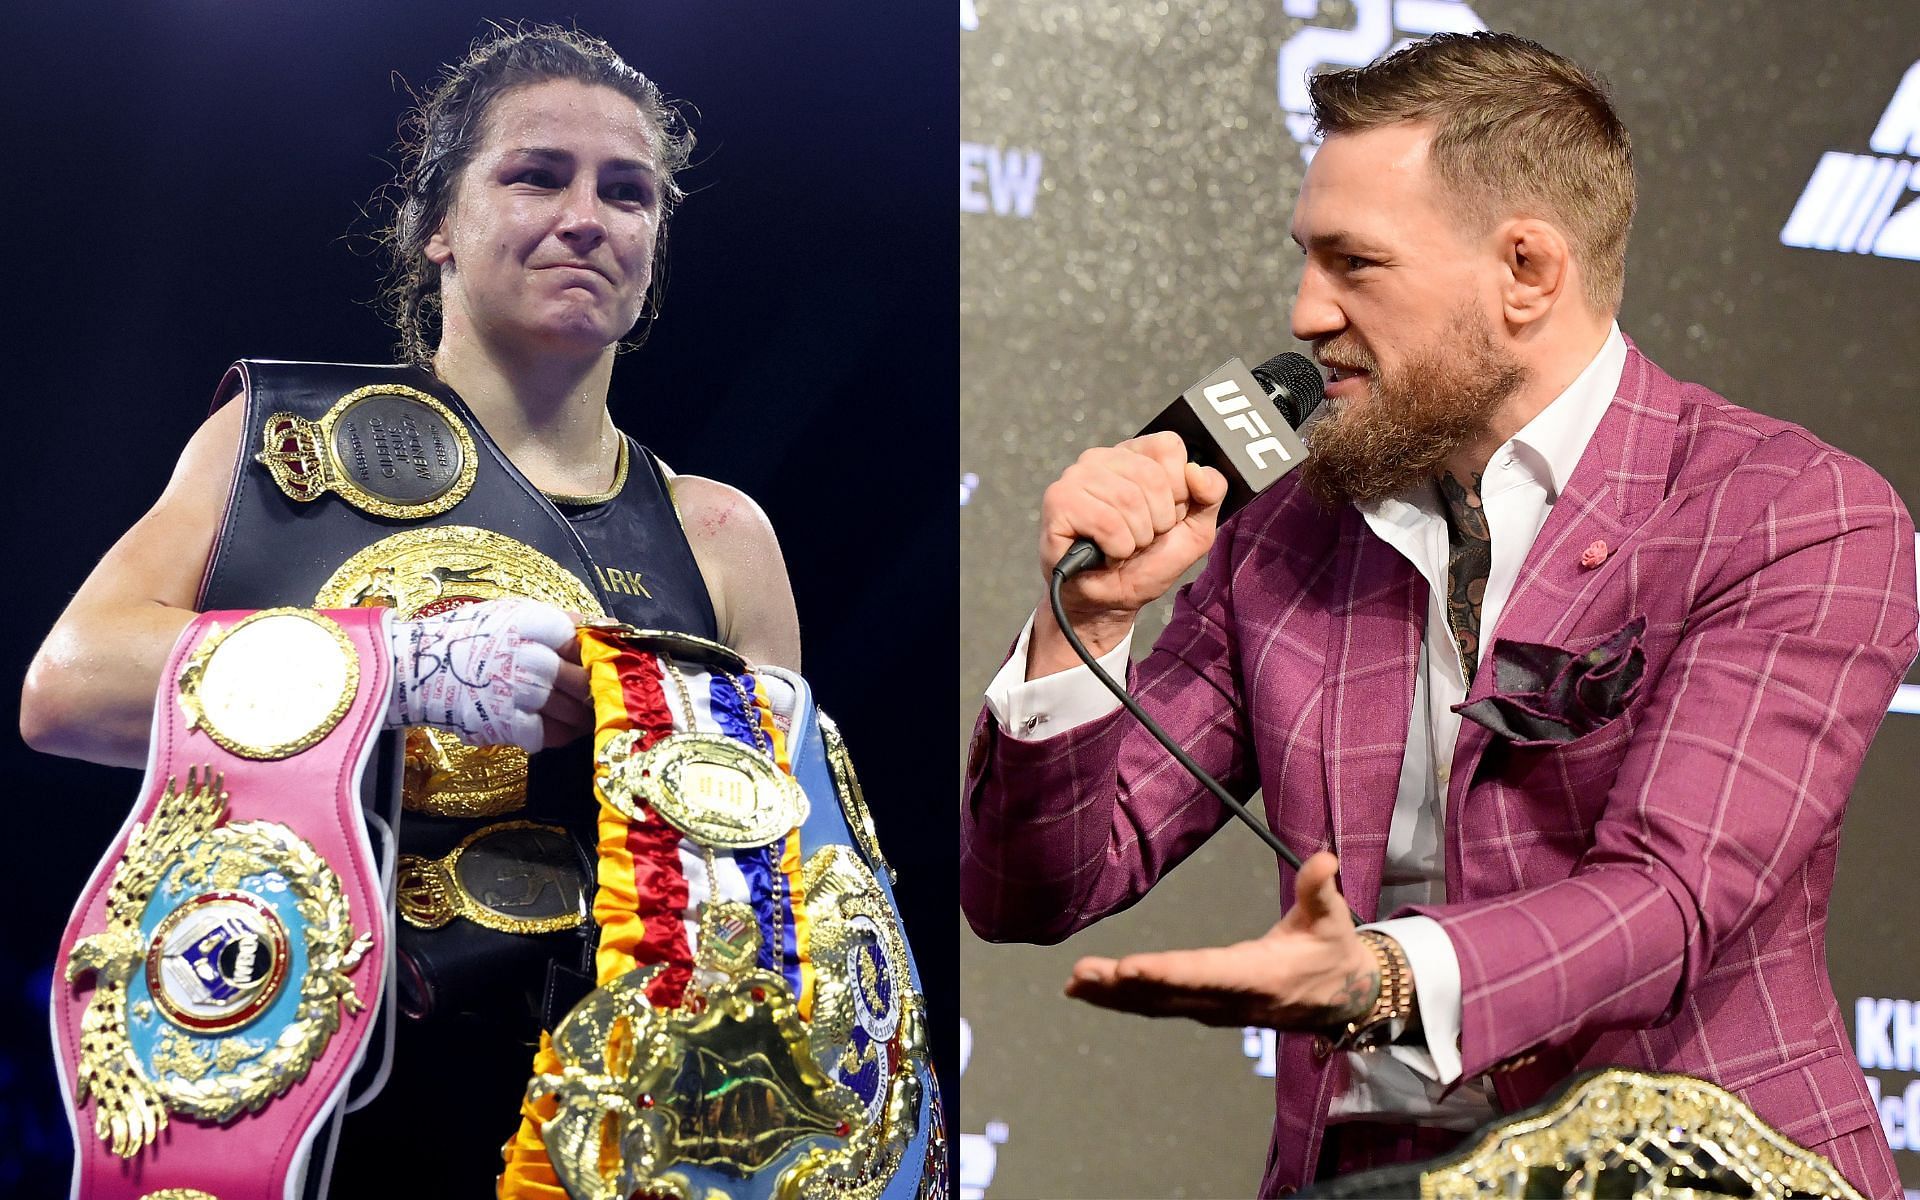 Katie Taylor (left) and Conor McGregor (right). [via Getty Images]